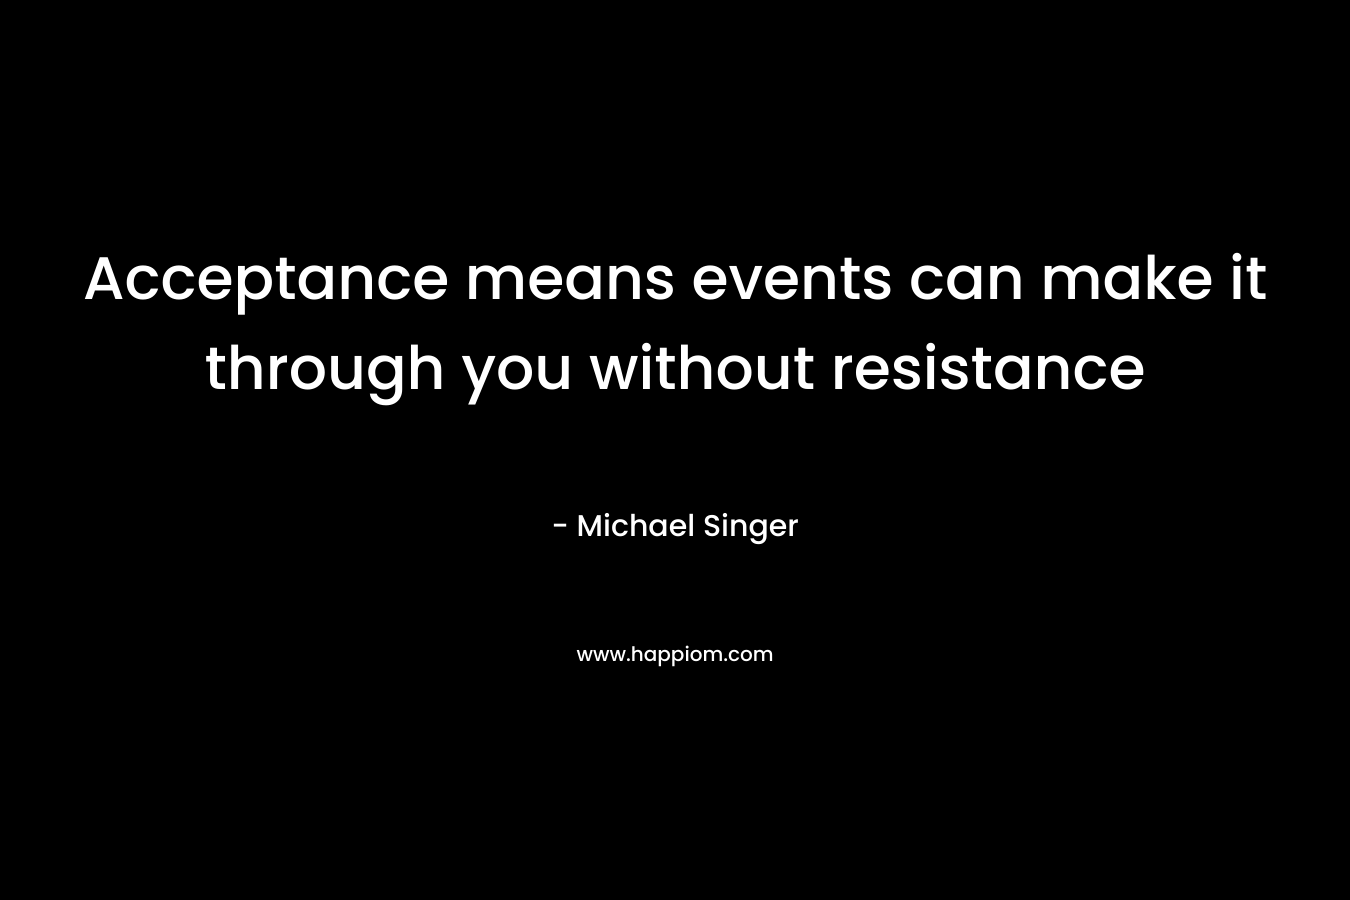 Acceptance means events can make it through you without resistance